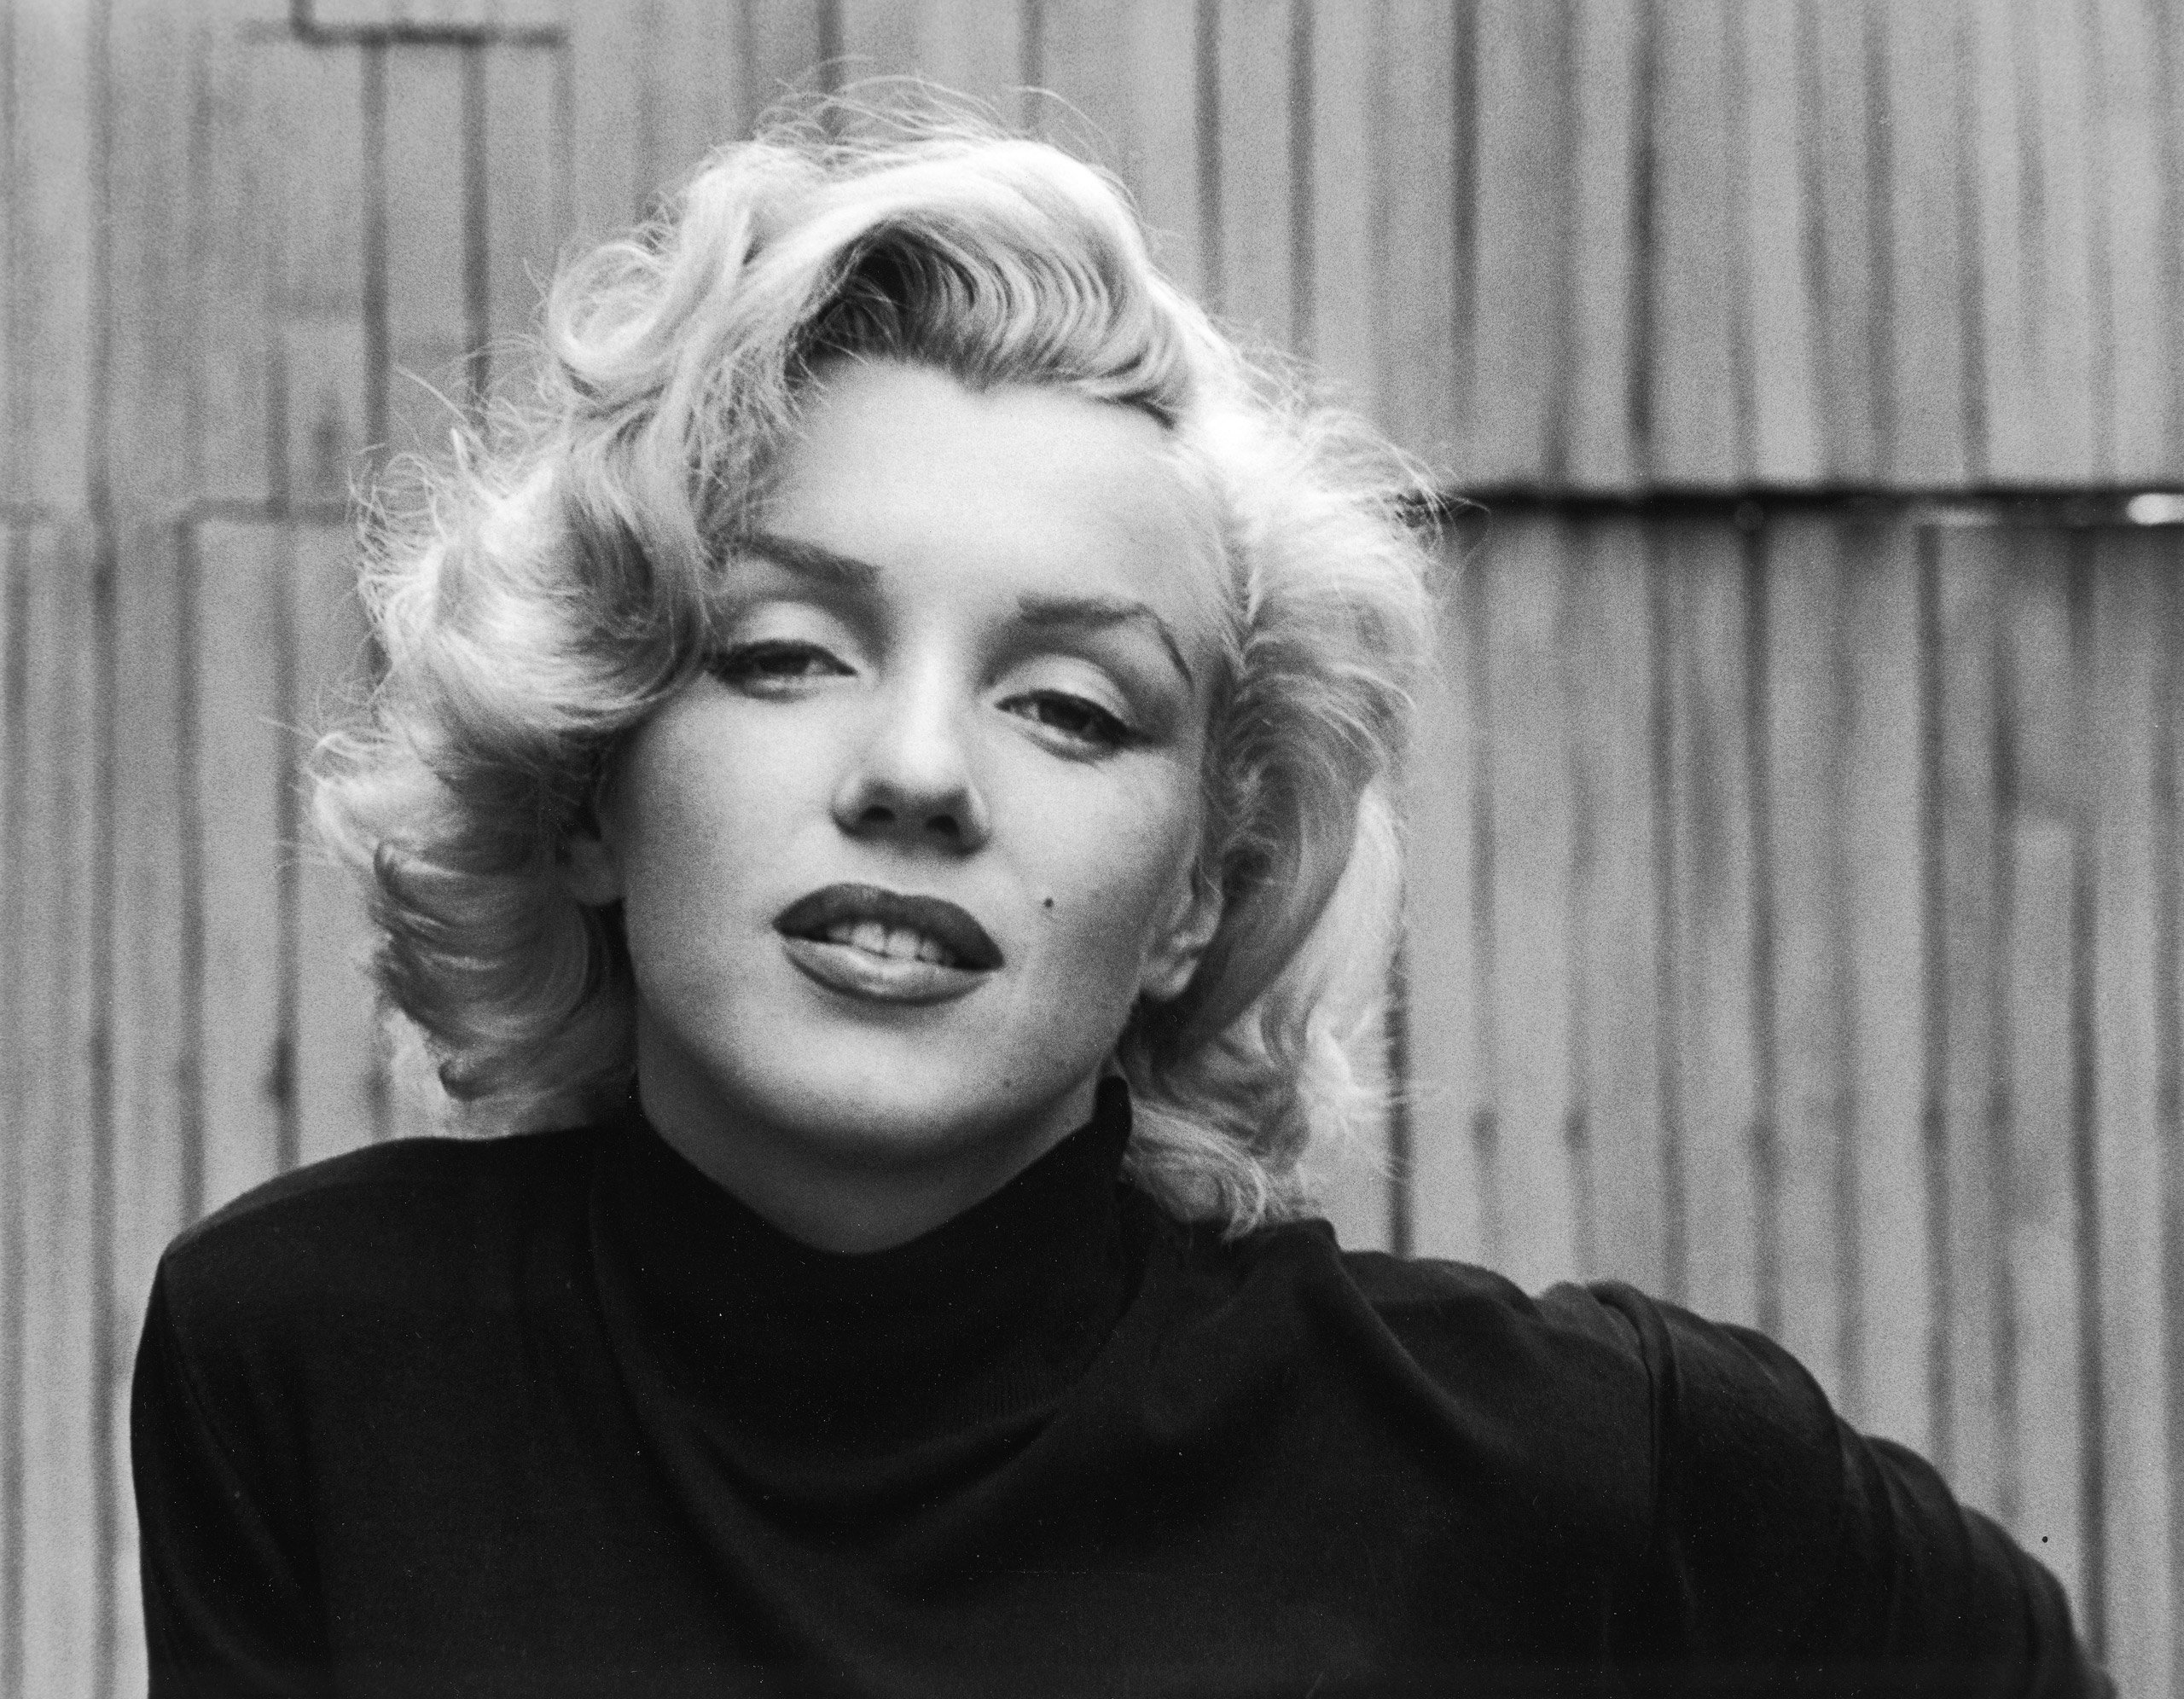 Marilyn Monroe 2 Arena Pile Top 10 Most Beautiful American Beauty In The World